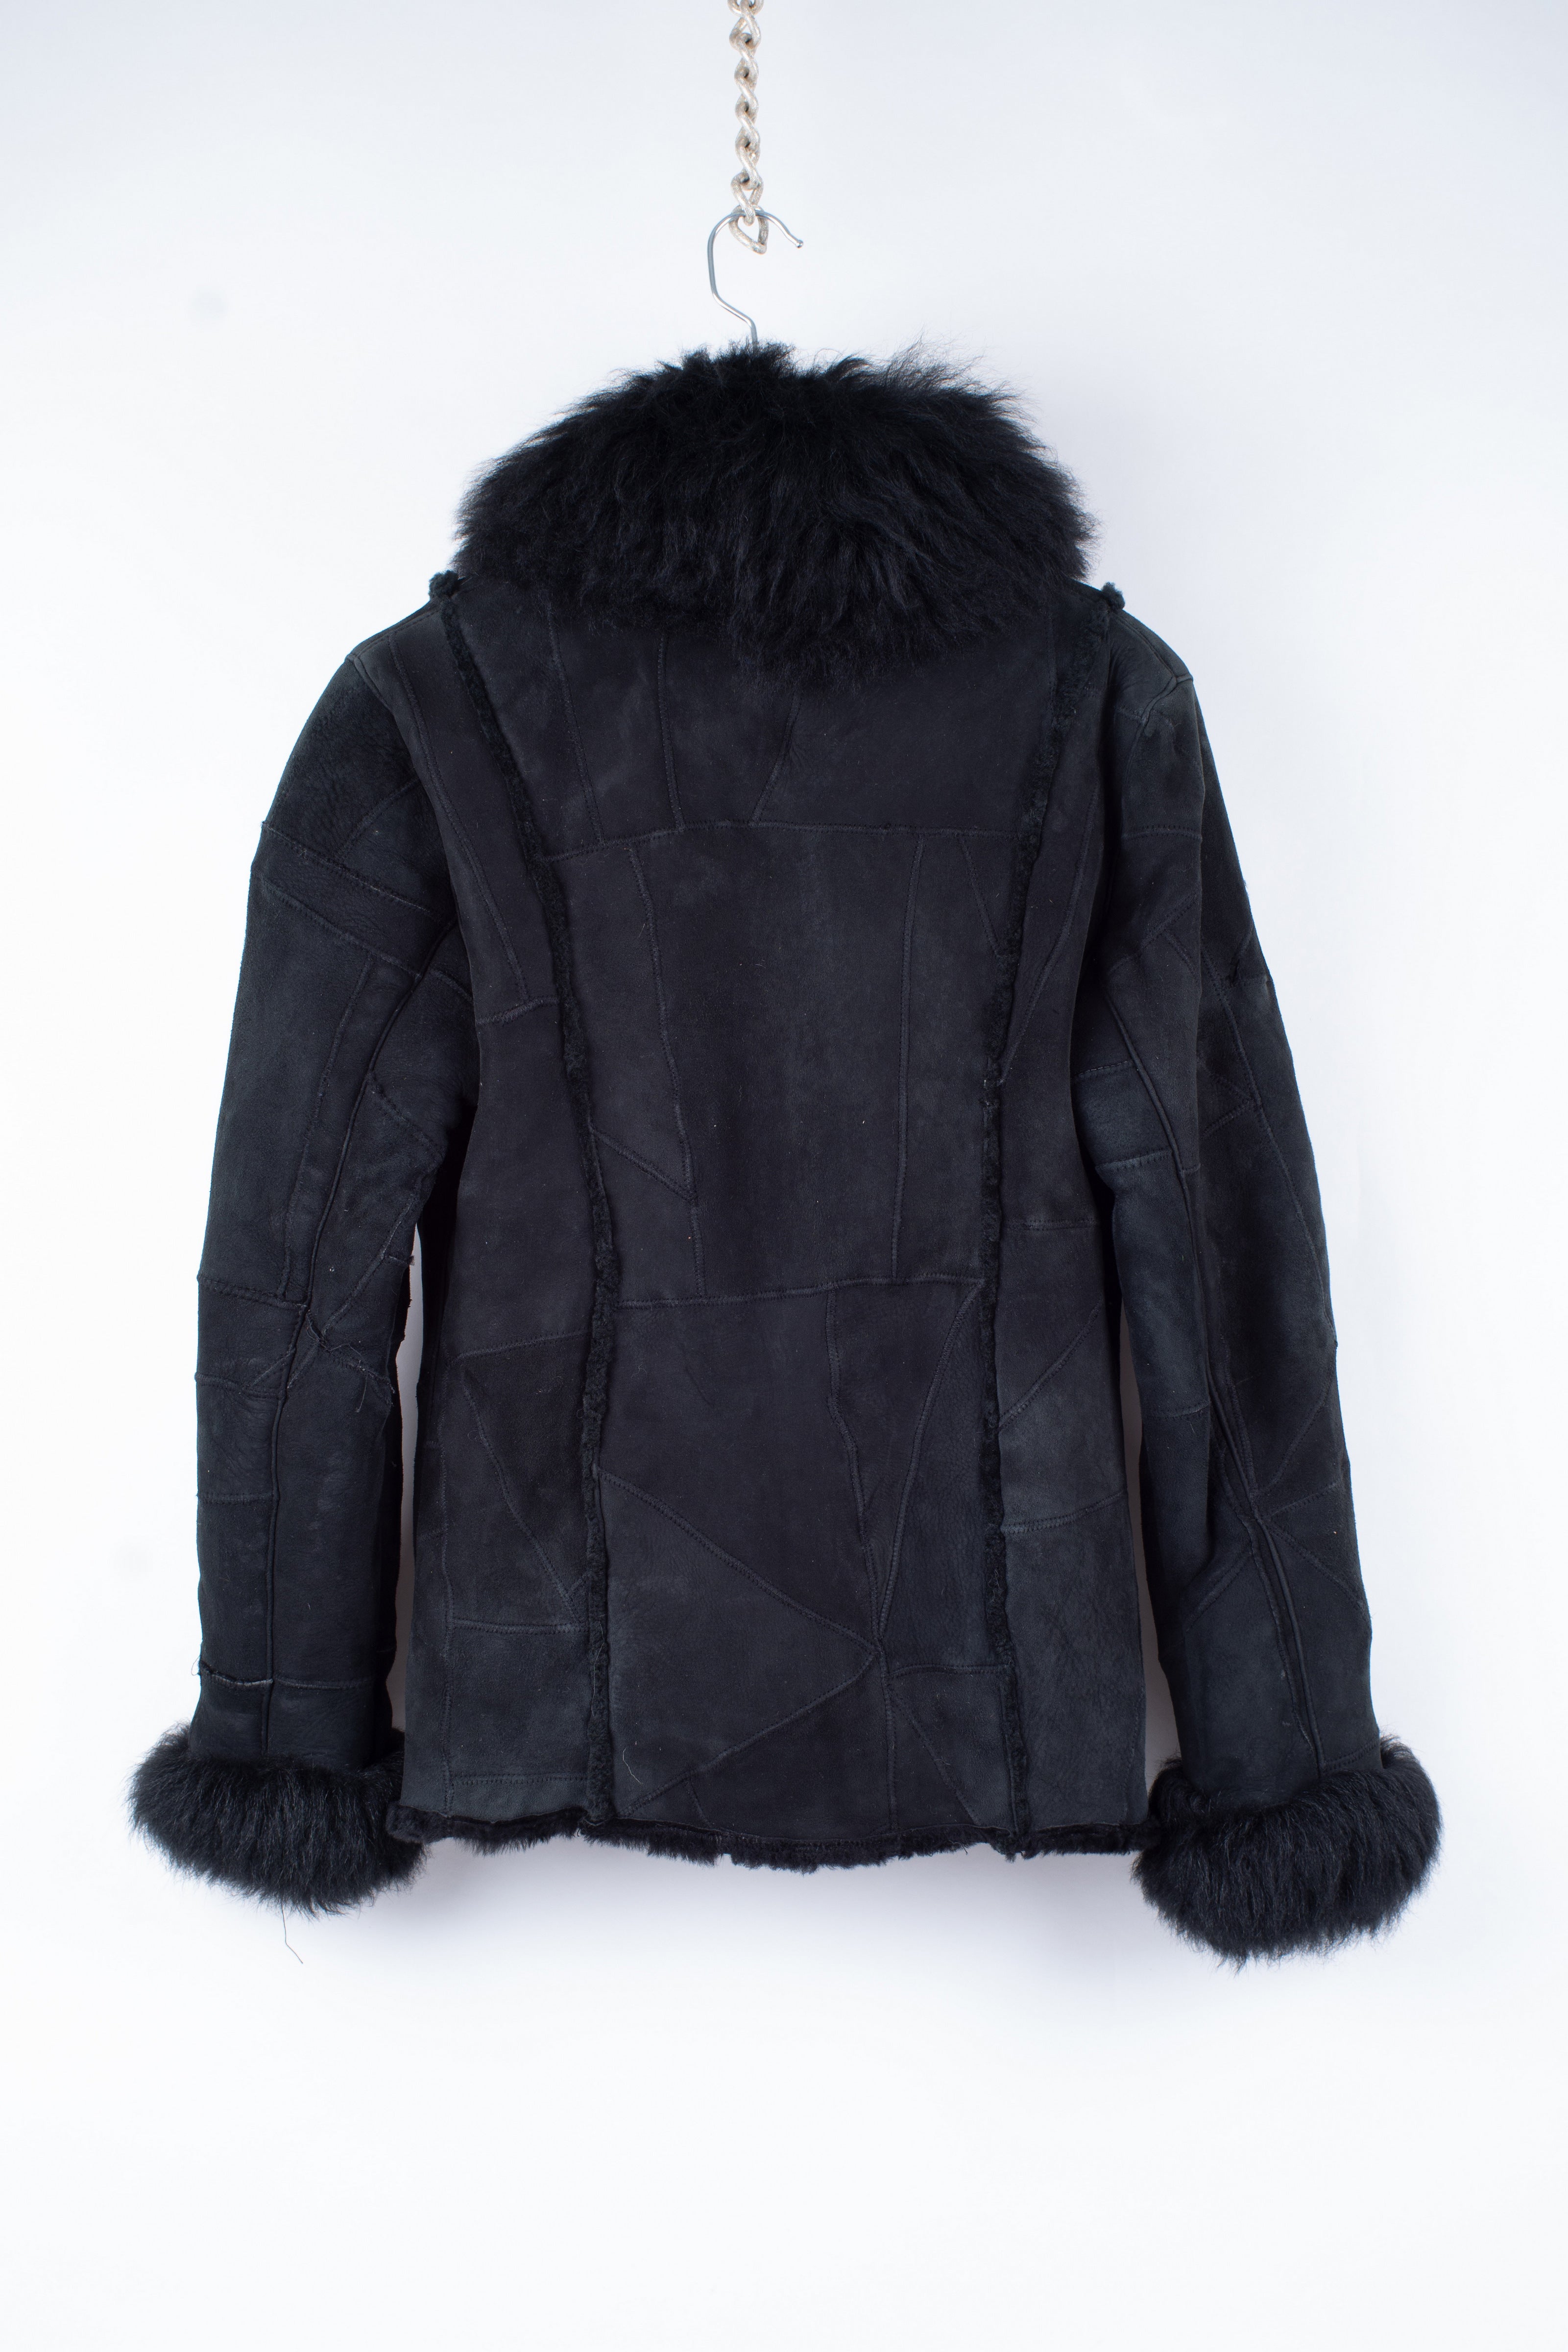 Woman's Black Patchwork Shearling Jacket With Shawl Fur Collar, M